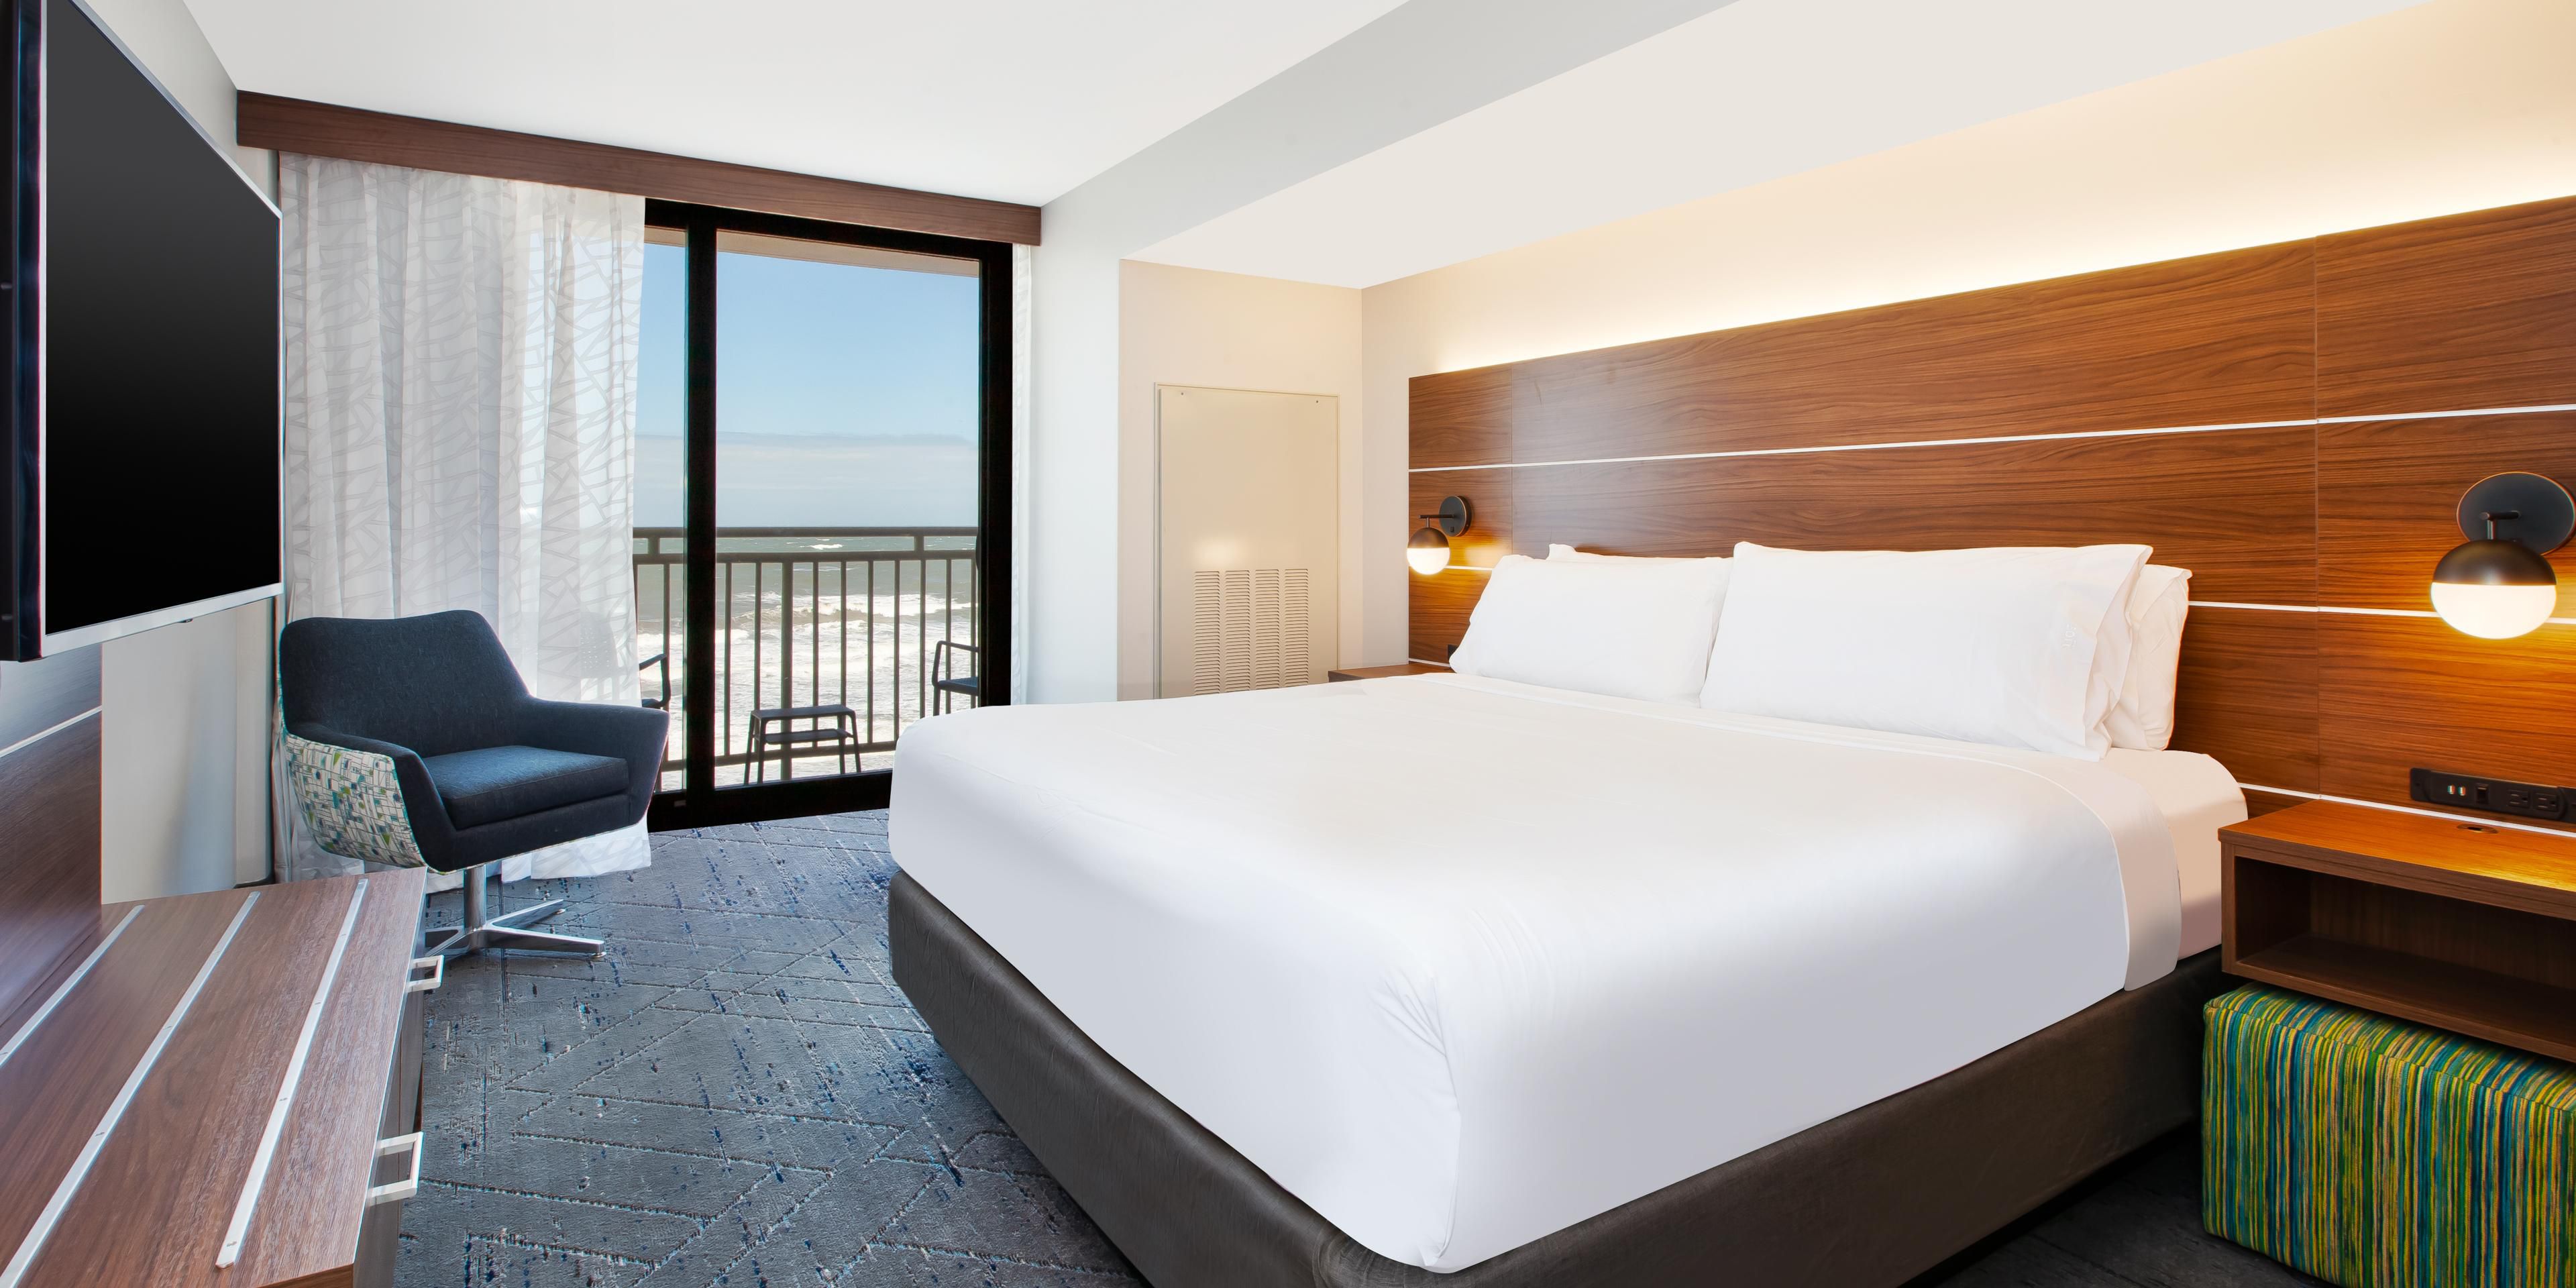 This hotel just completed a top to bottom renovation of all guest rooms and public space.